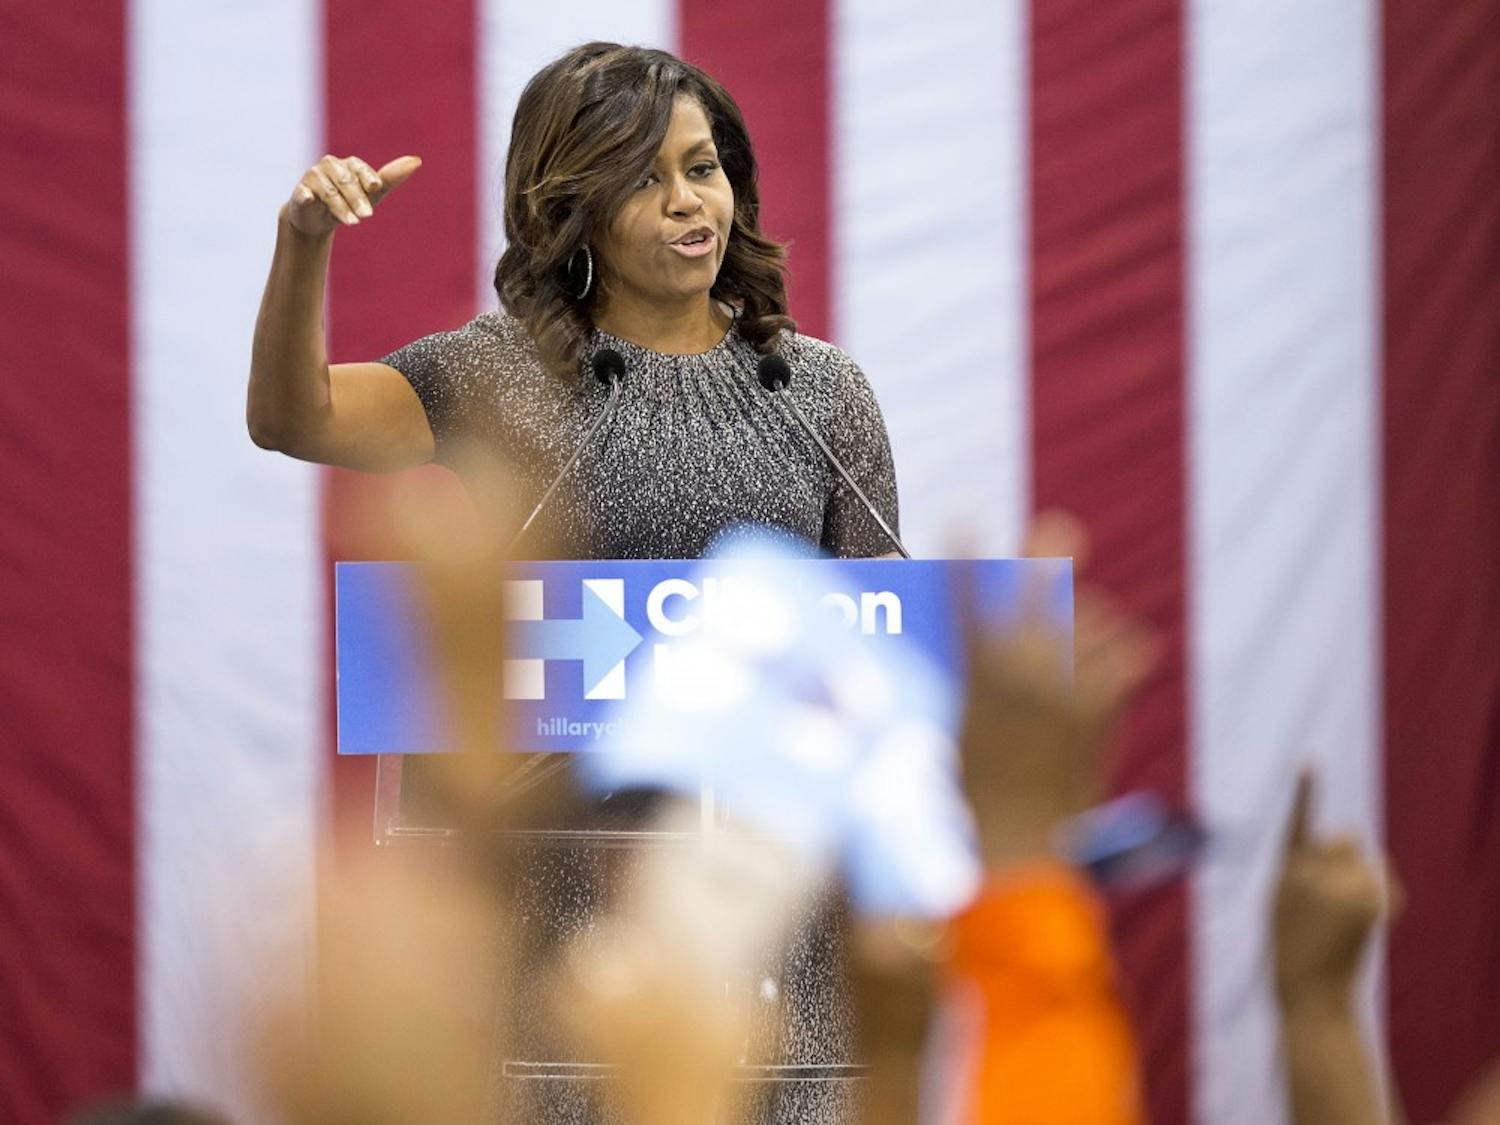 Photo Gallery: first lady Michelle Obama speaks at Clinton event in Phoenix